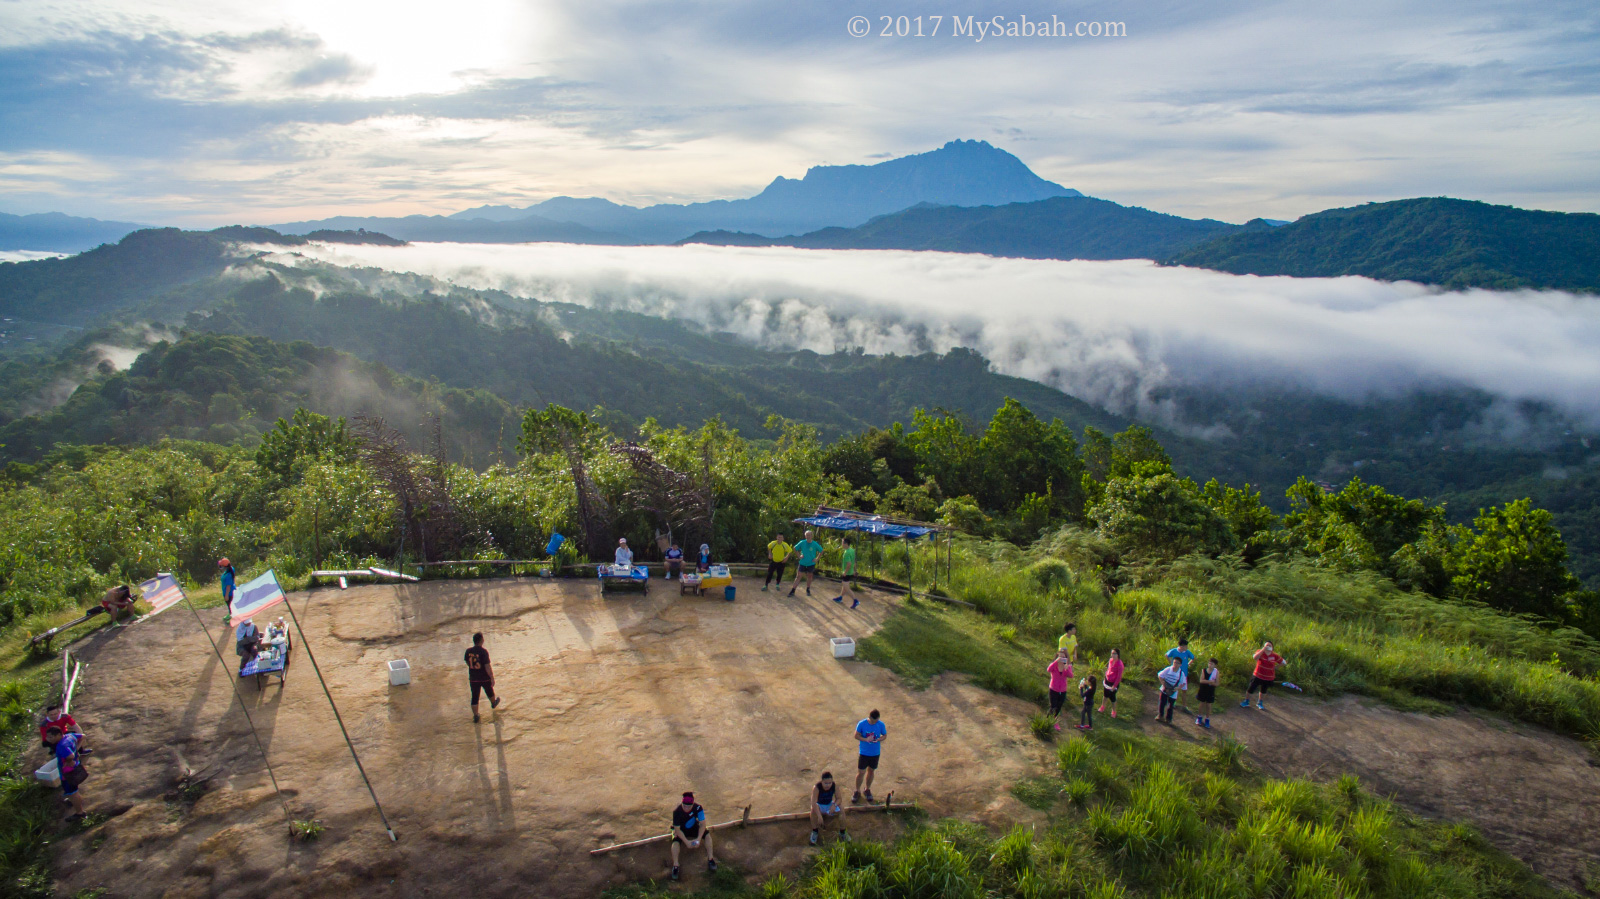 Hikers relax and enjoy the morning view on Bukit Perahu